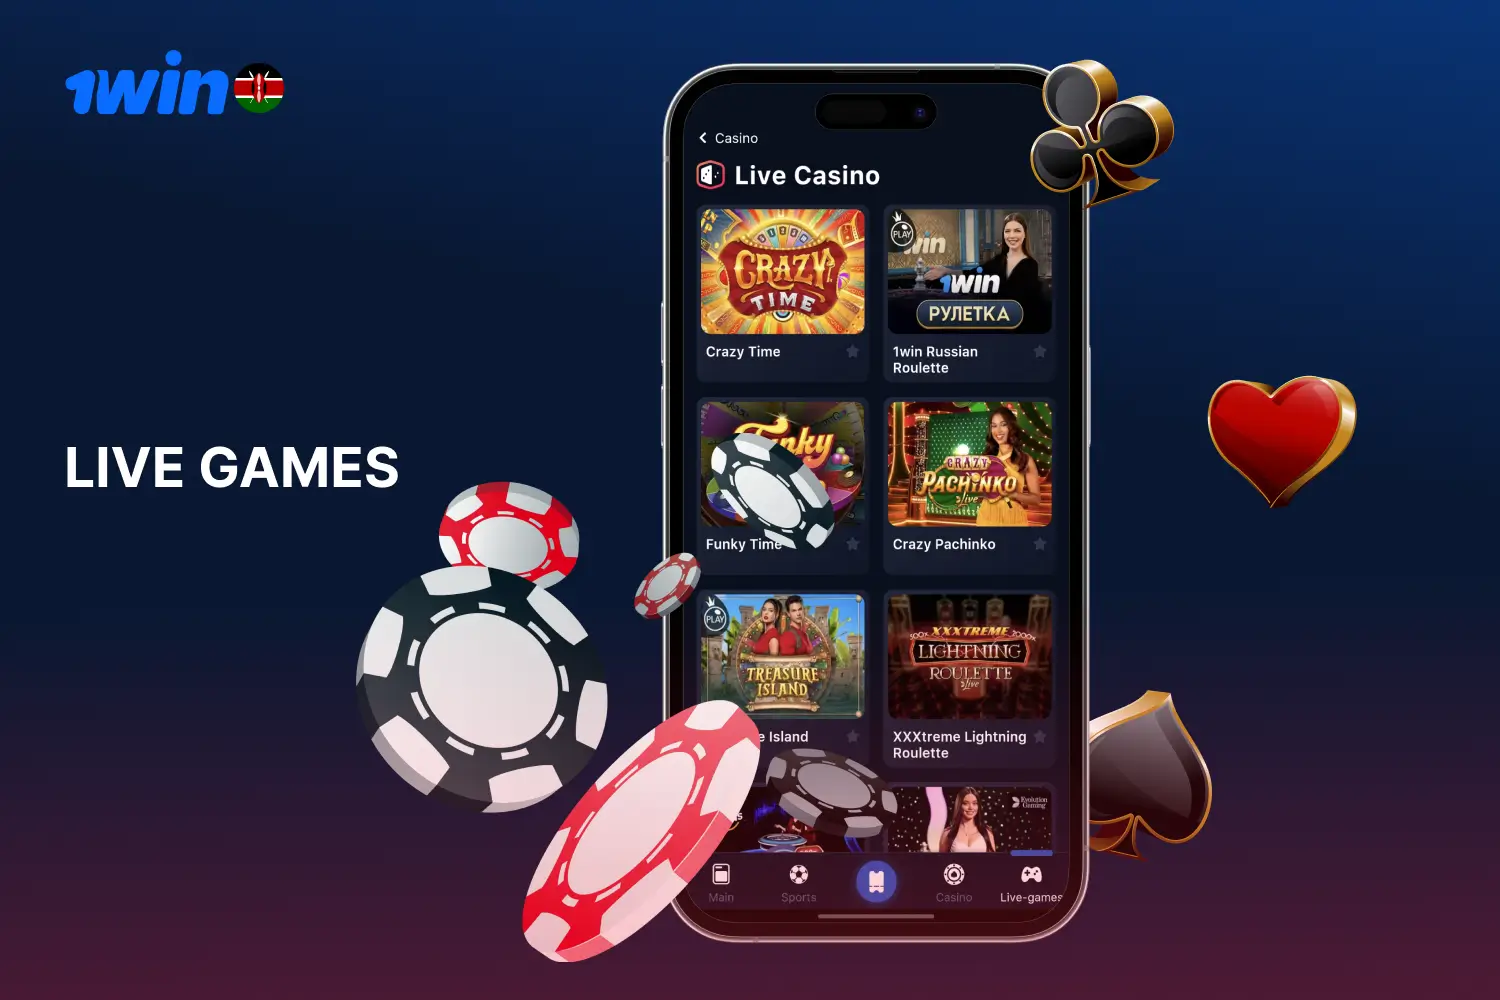 1win offers live dealer games to Kenyan users